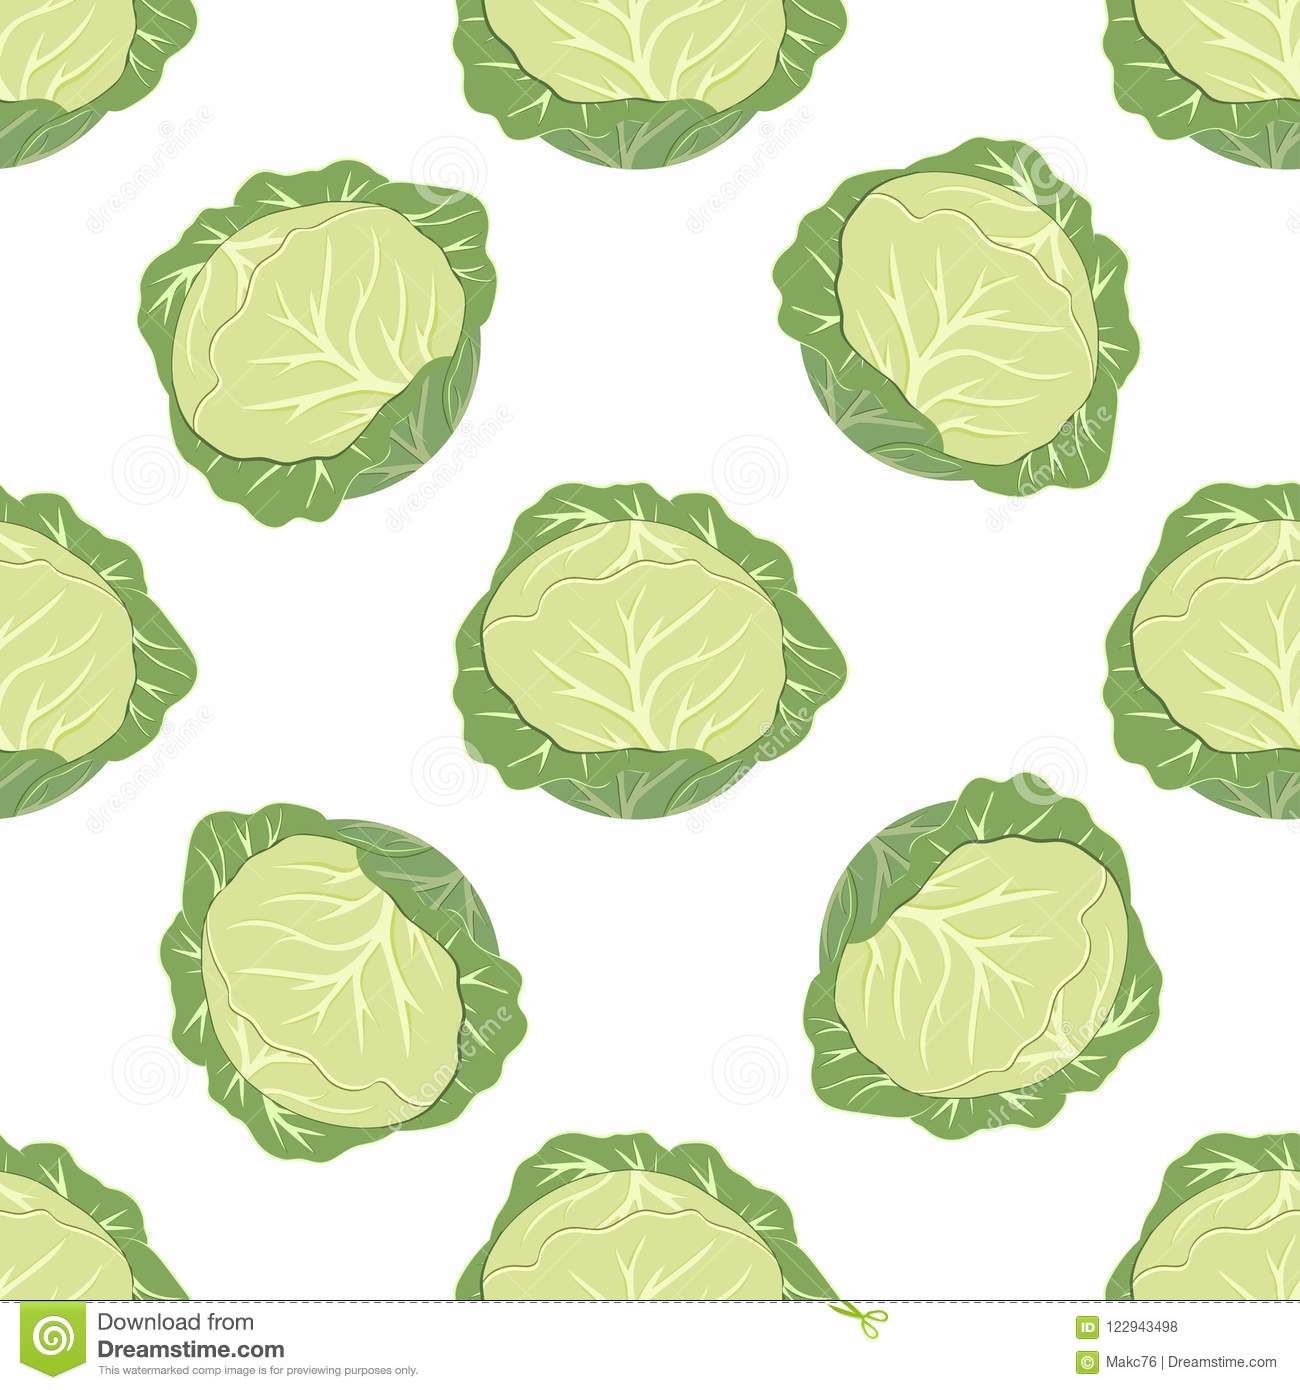 HD green cabbage wallpapers | Peakpx